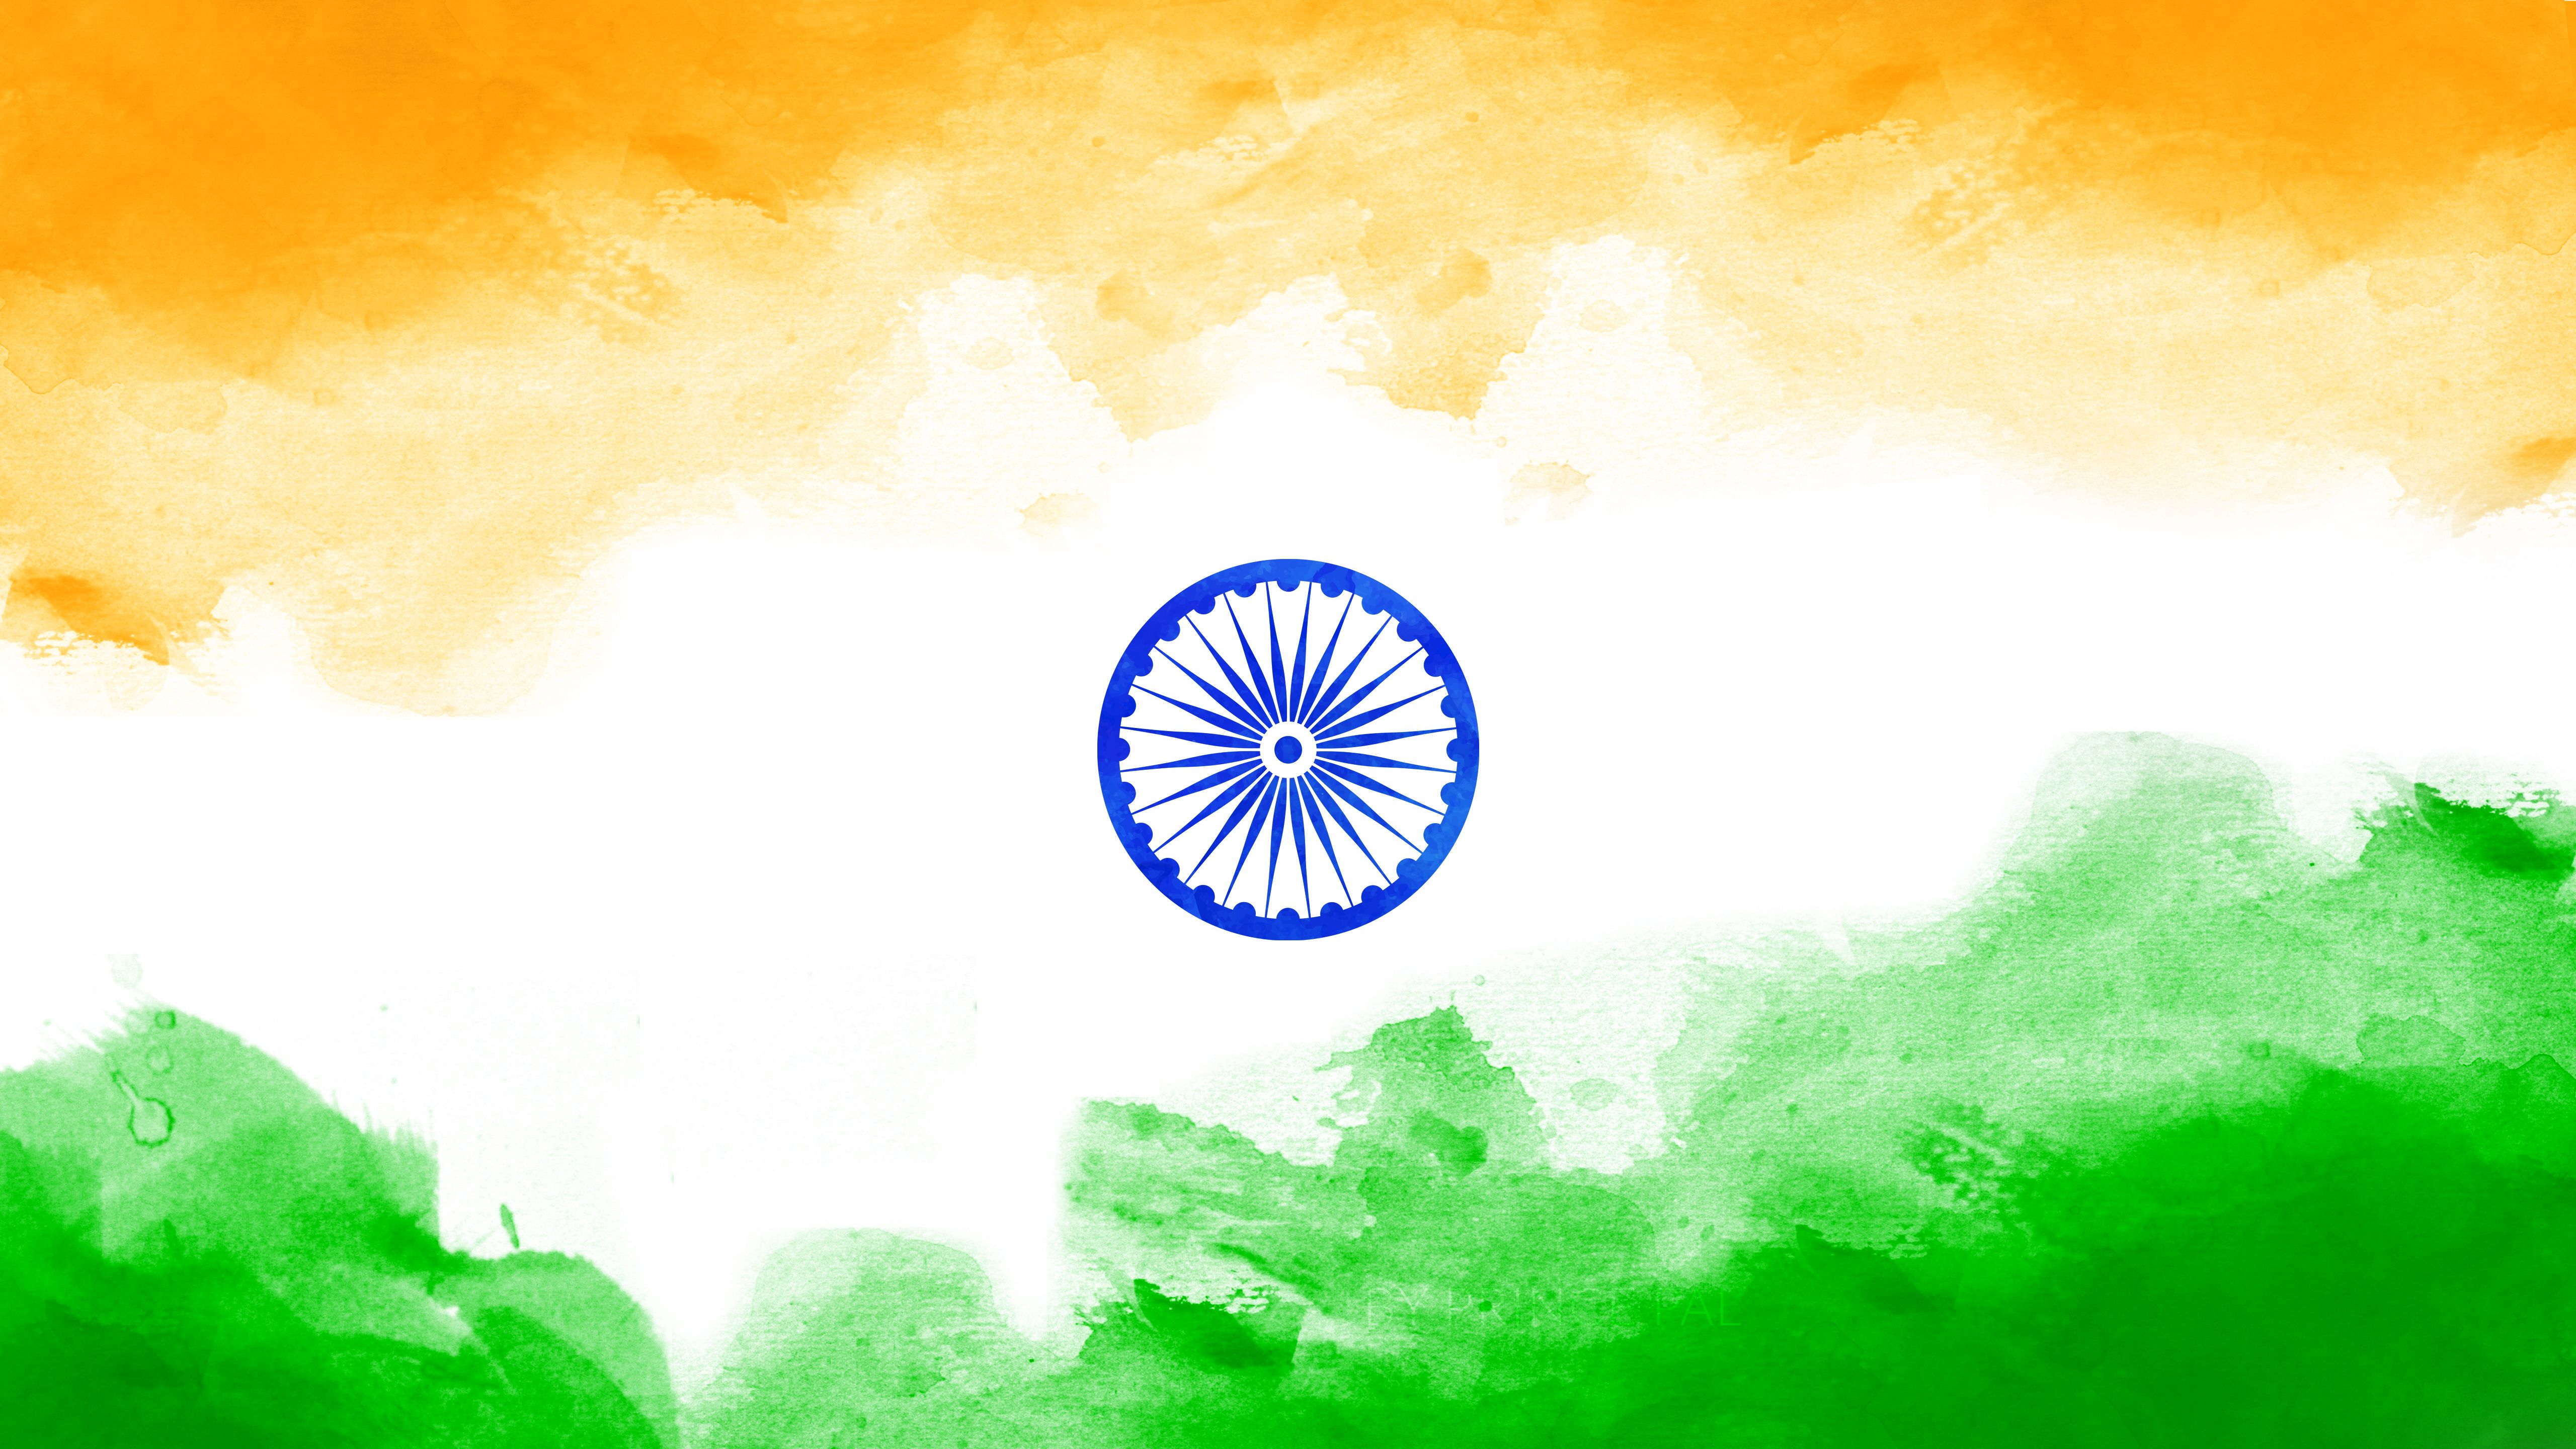 India Flag Wallpaper Independence Day